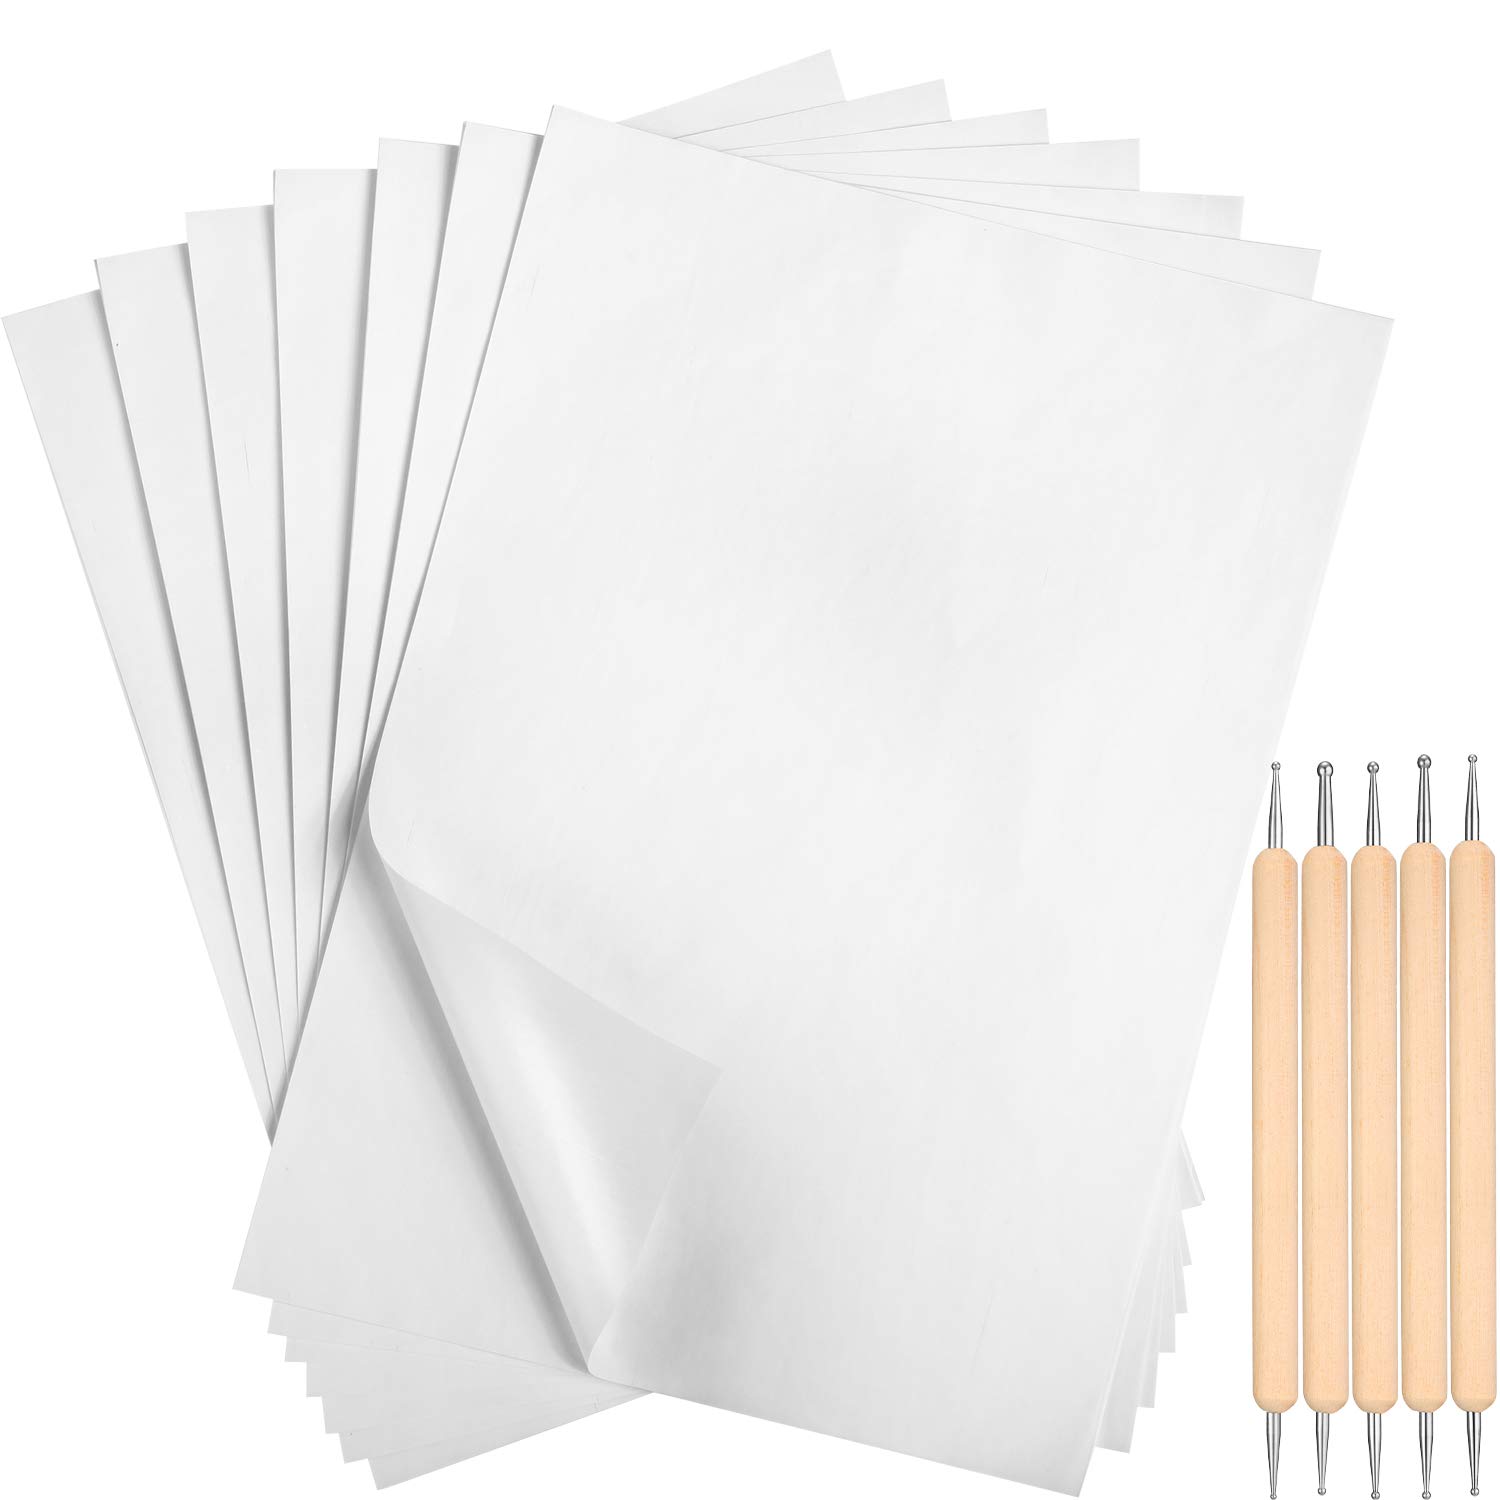 Outus White Carbon Transfer Paper 11.7 x 8.3 Inch Tracing Paper